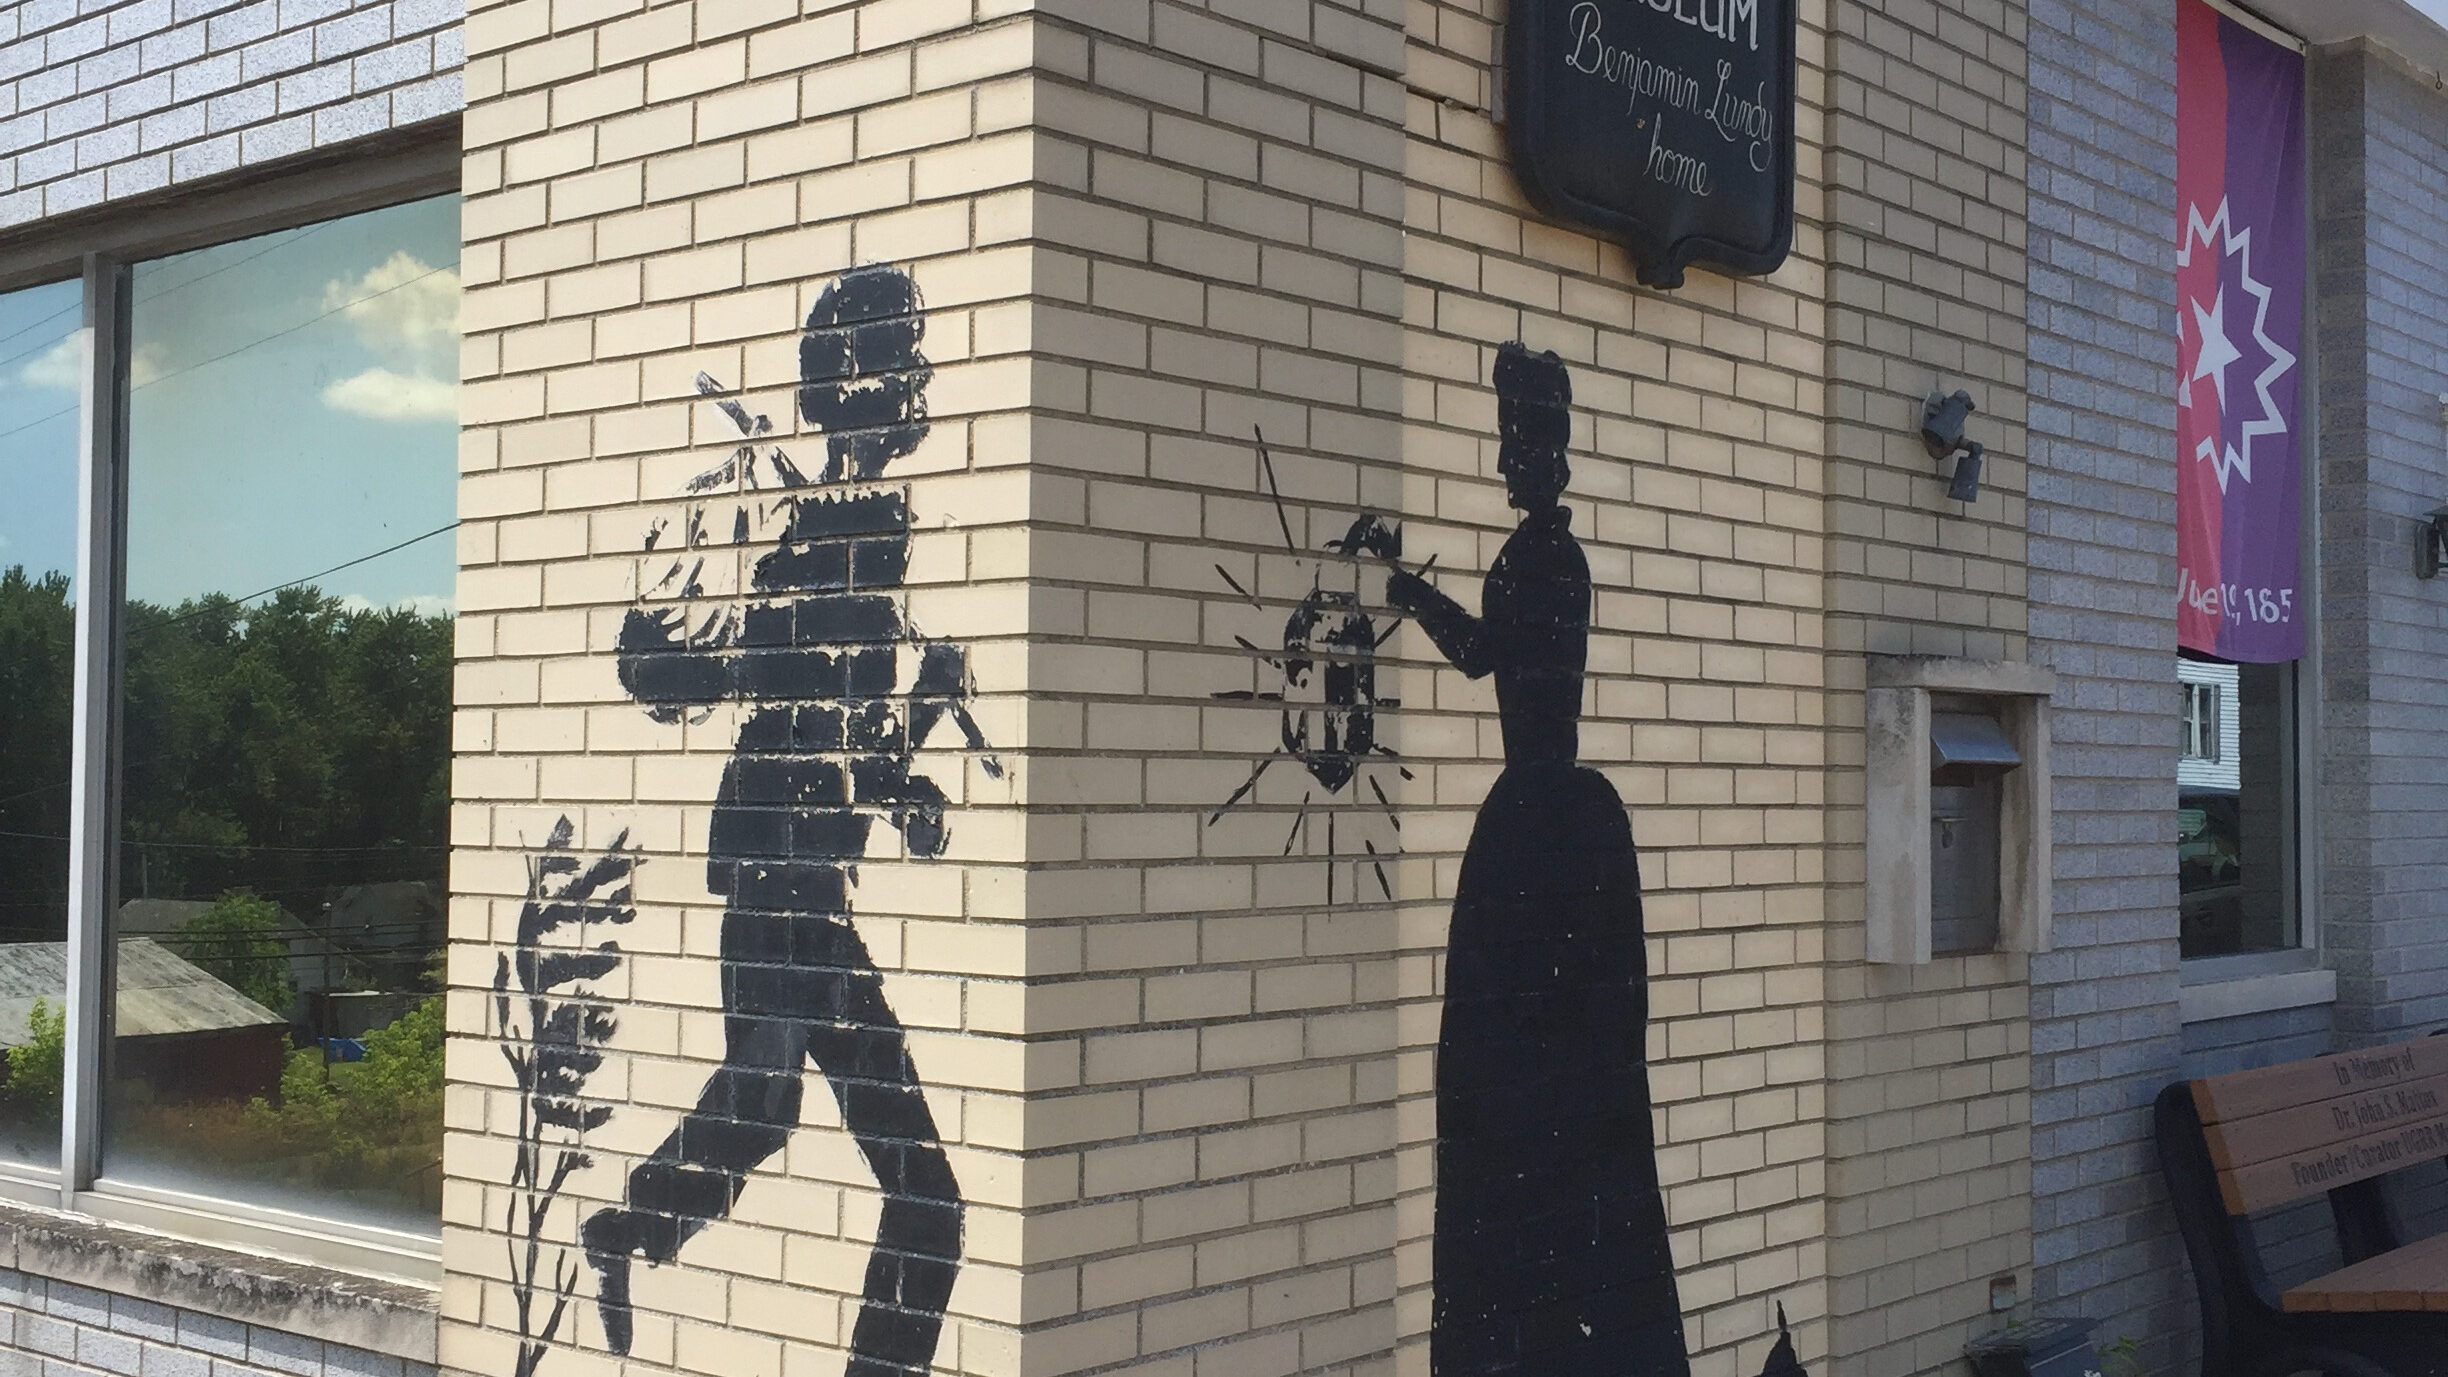 Painting on the outside of the Underground Railroad Museum in Flushing, Ohio. It depicts a person carrying a sack on a stick over their back, and another person holding a shining lantern.